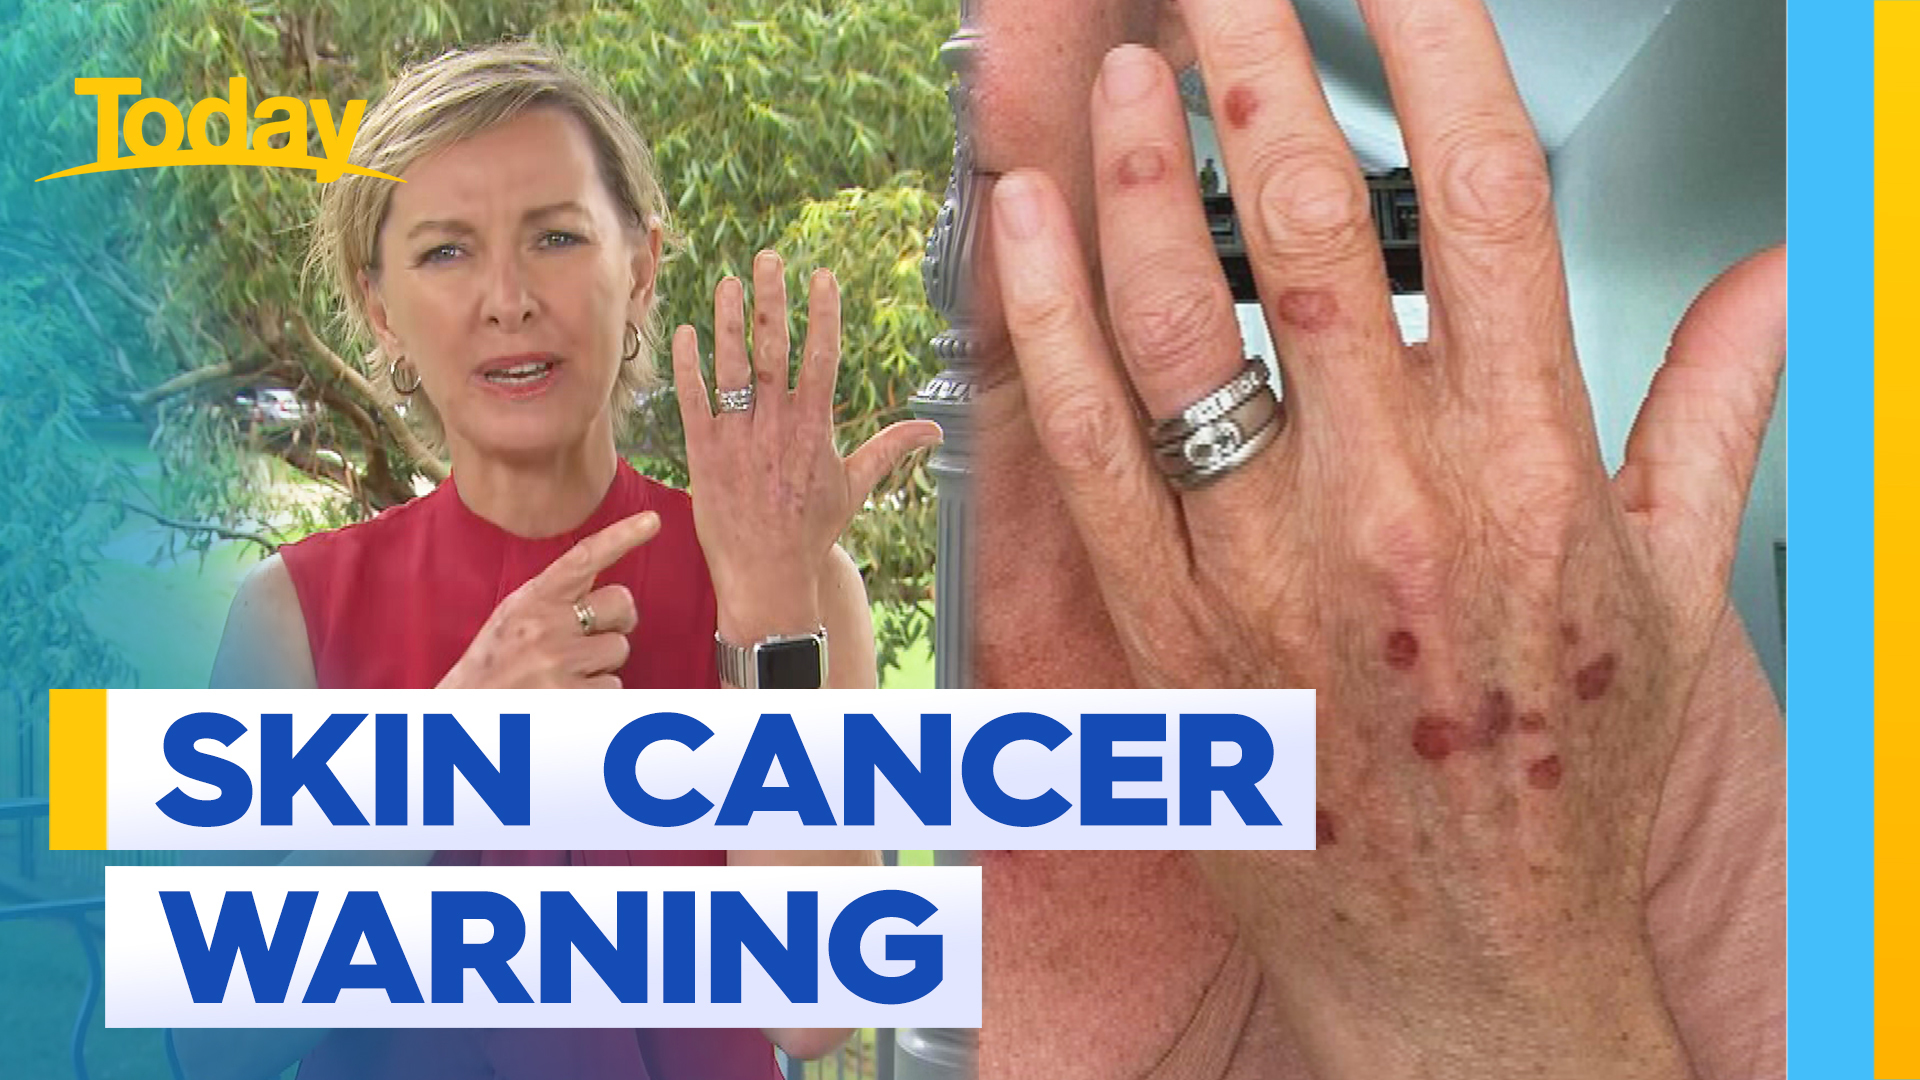 Deb Knight's tanning warning after pre-cancer spots removed